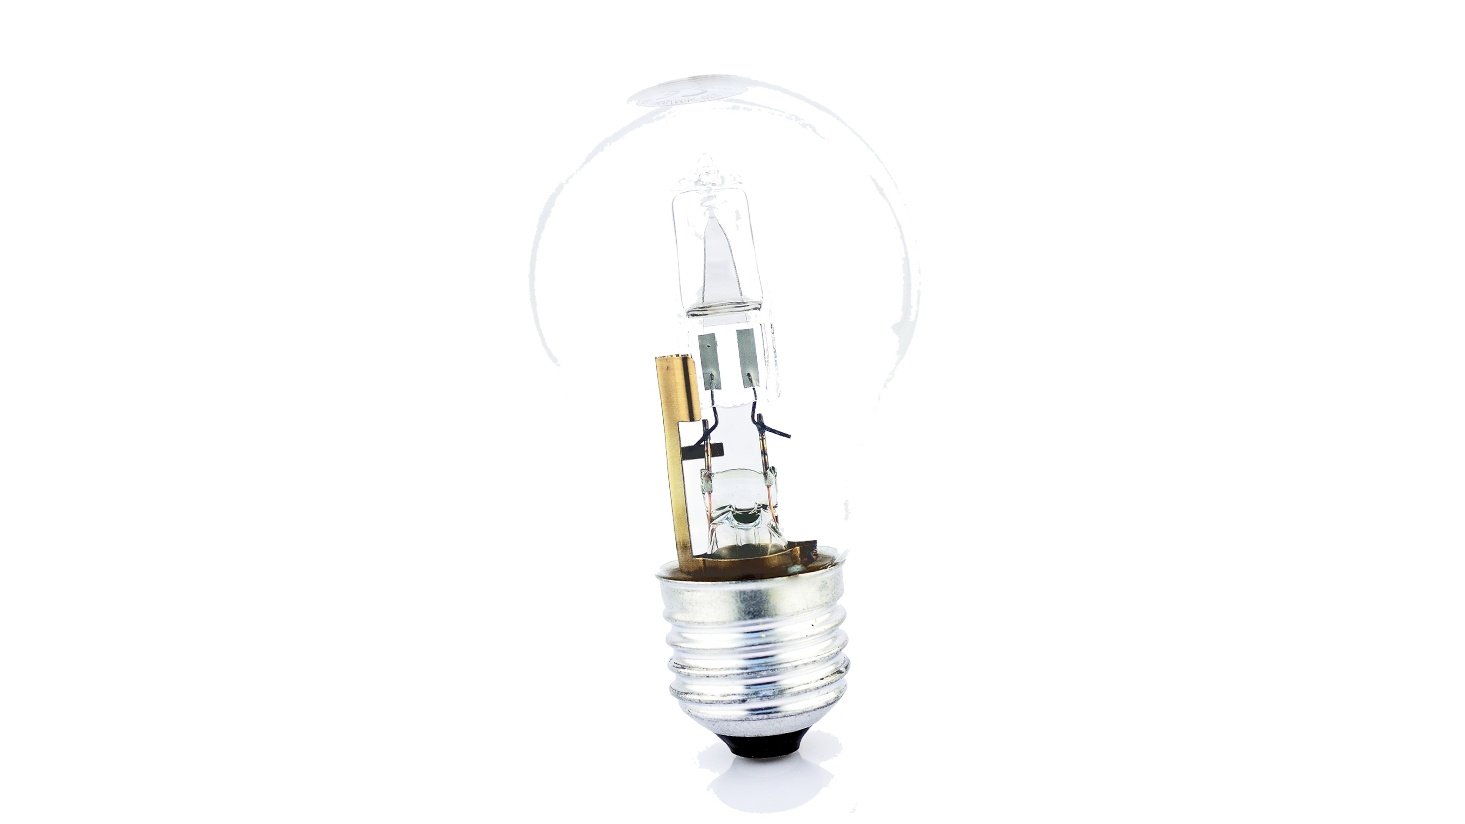 What is halogen and how is it different than incandescent?